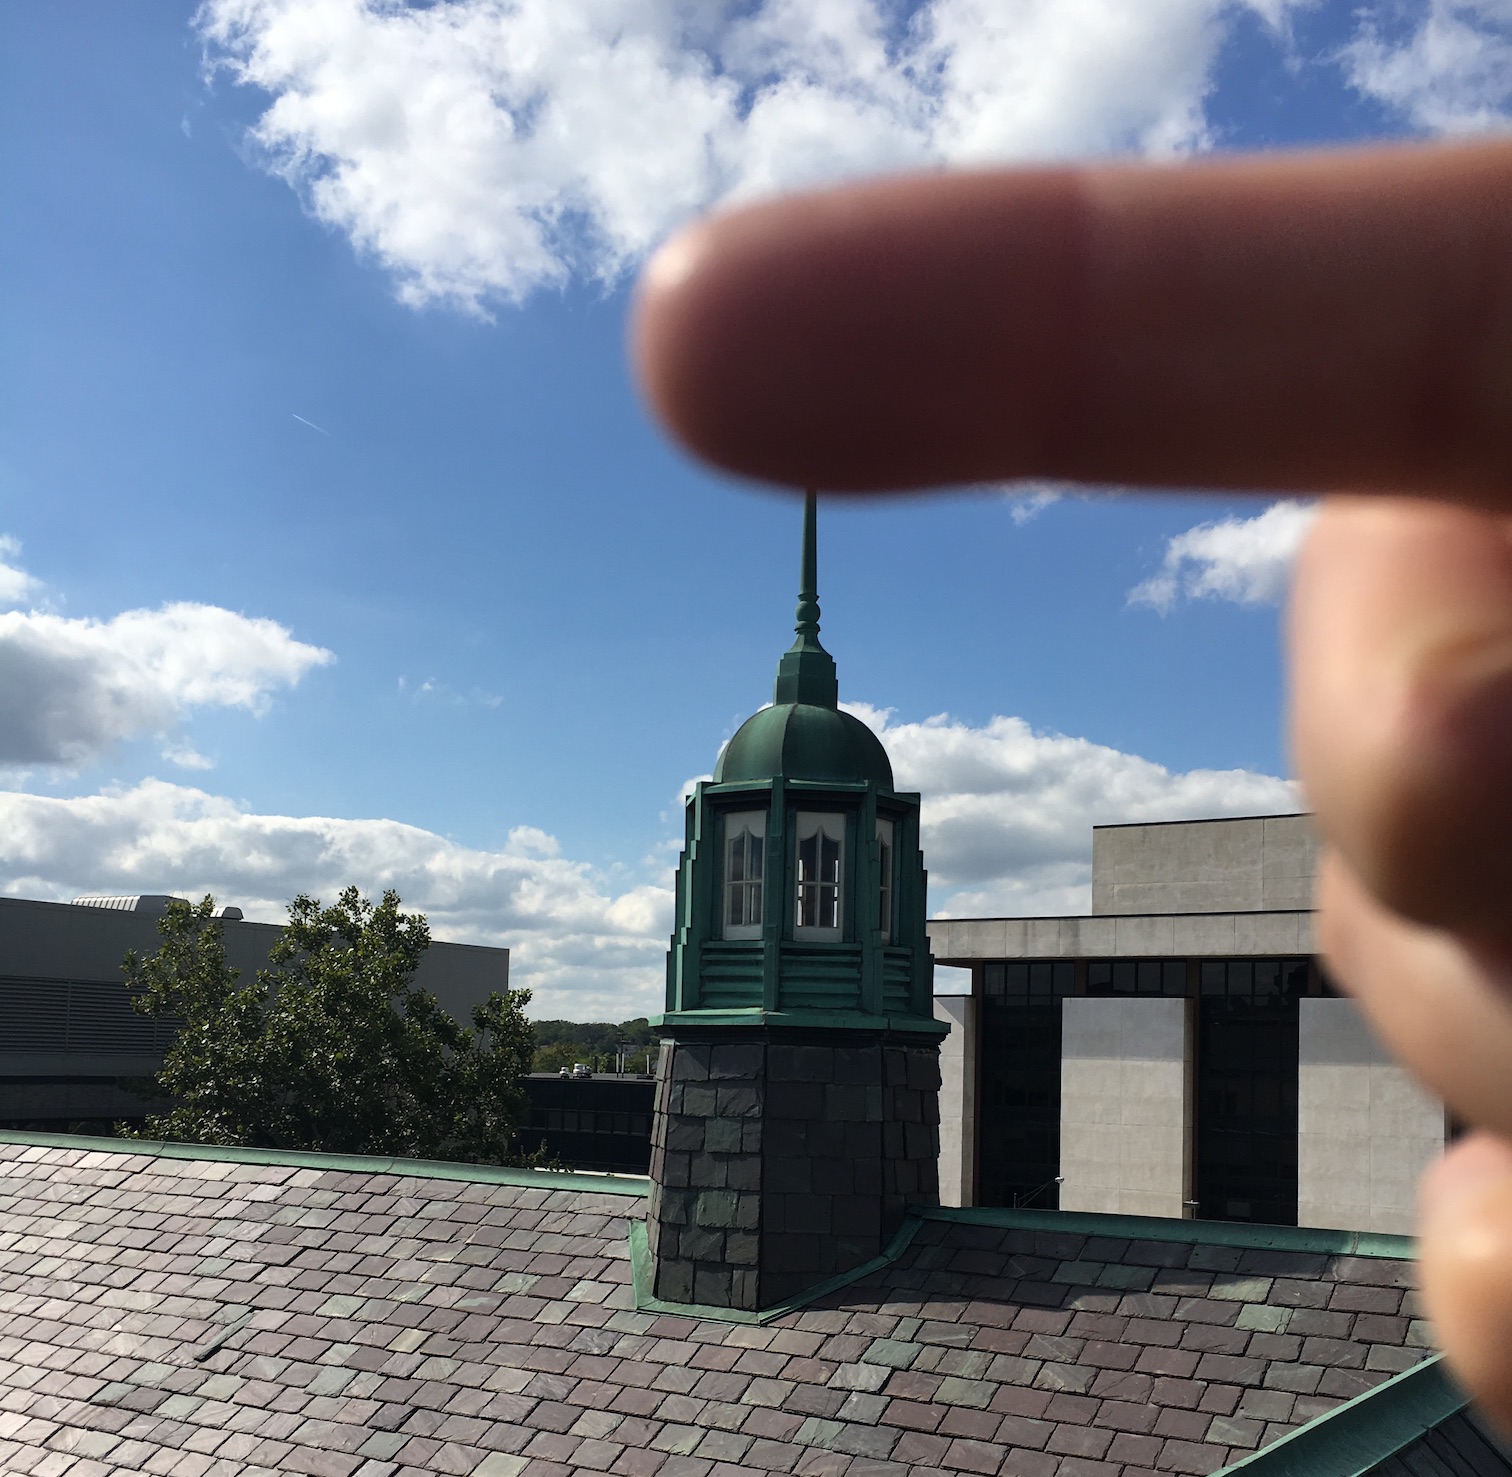 Kathy's view of the cupola